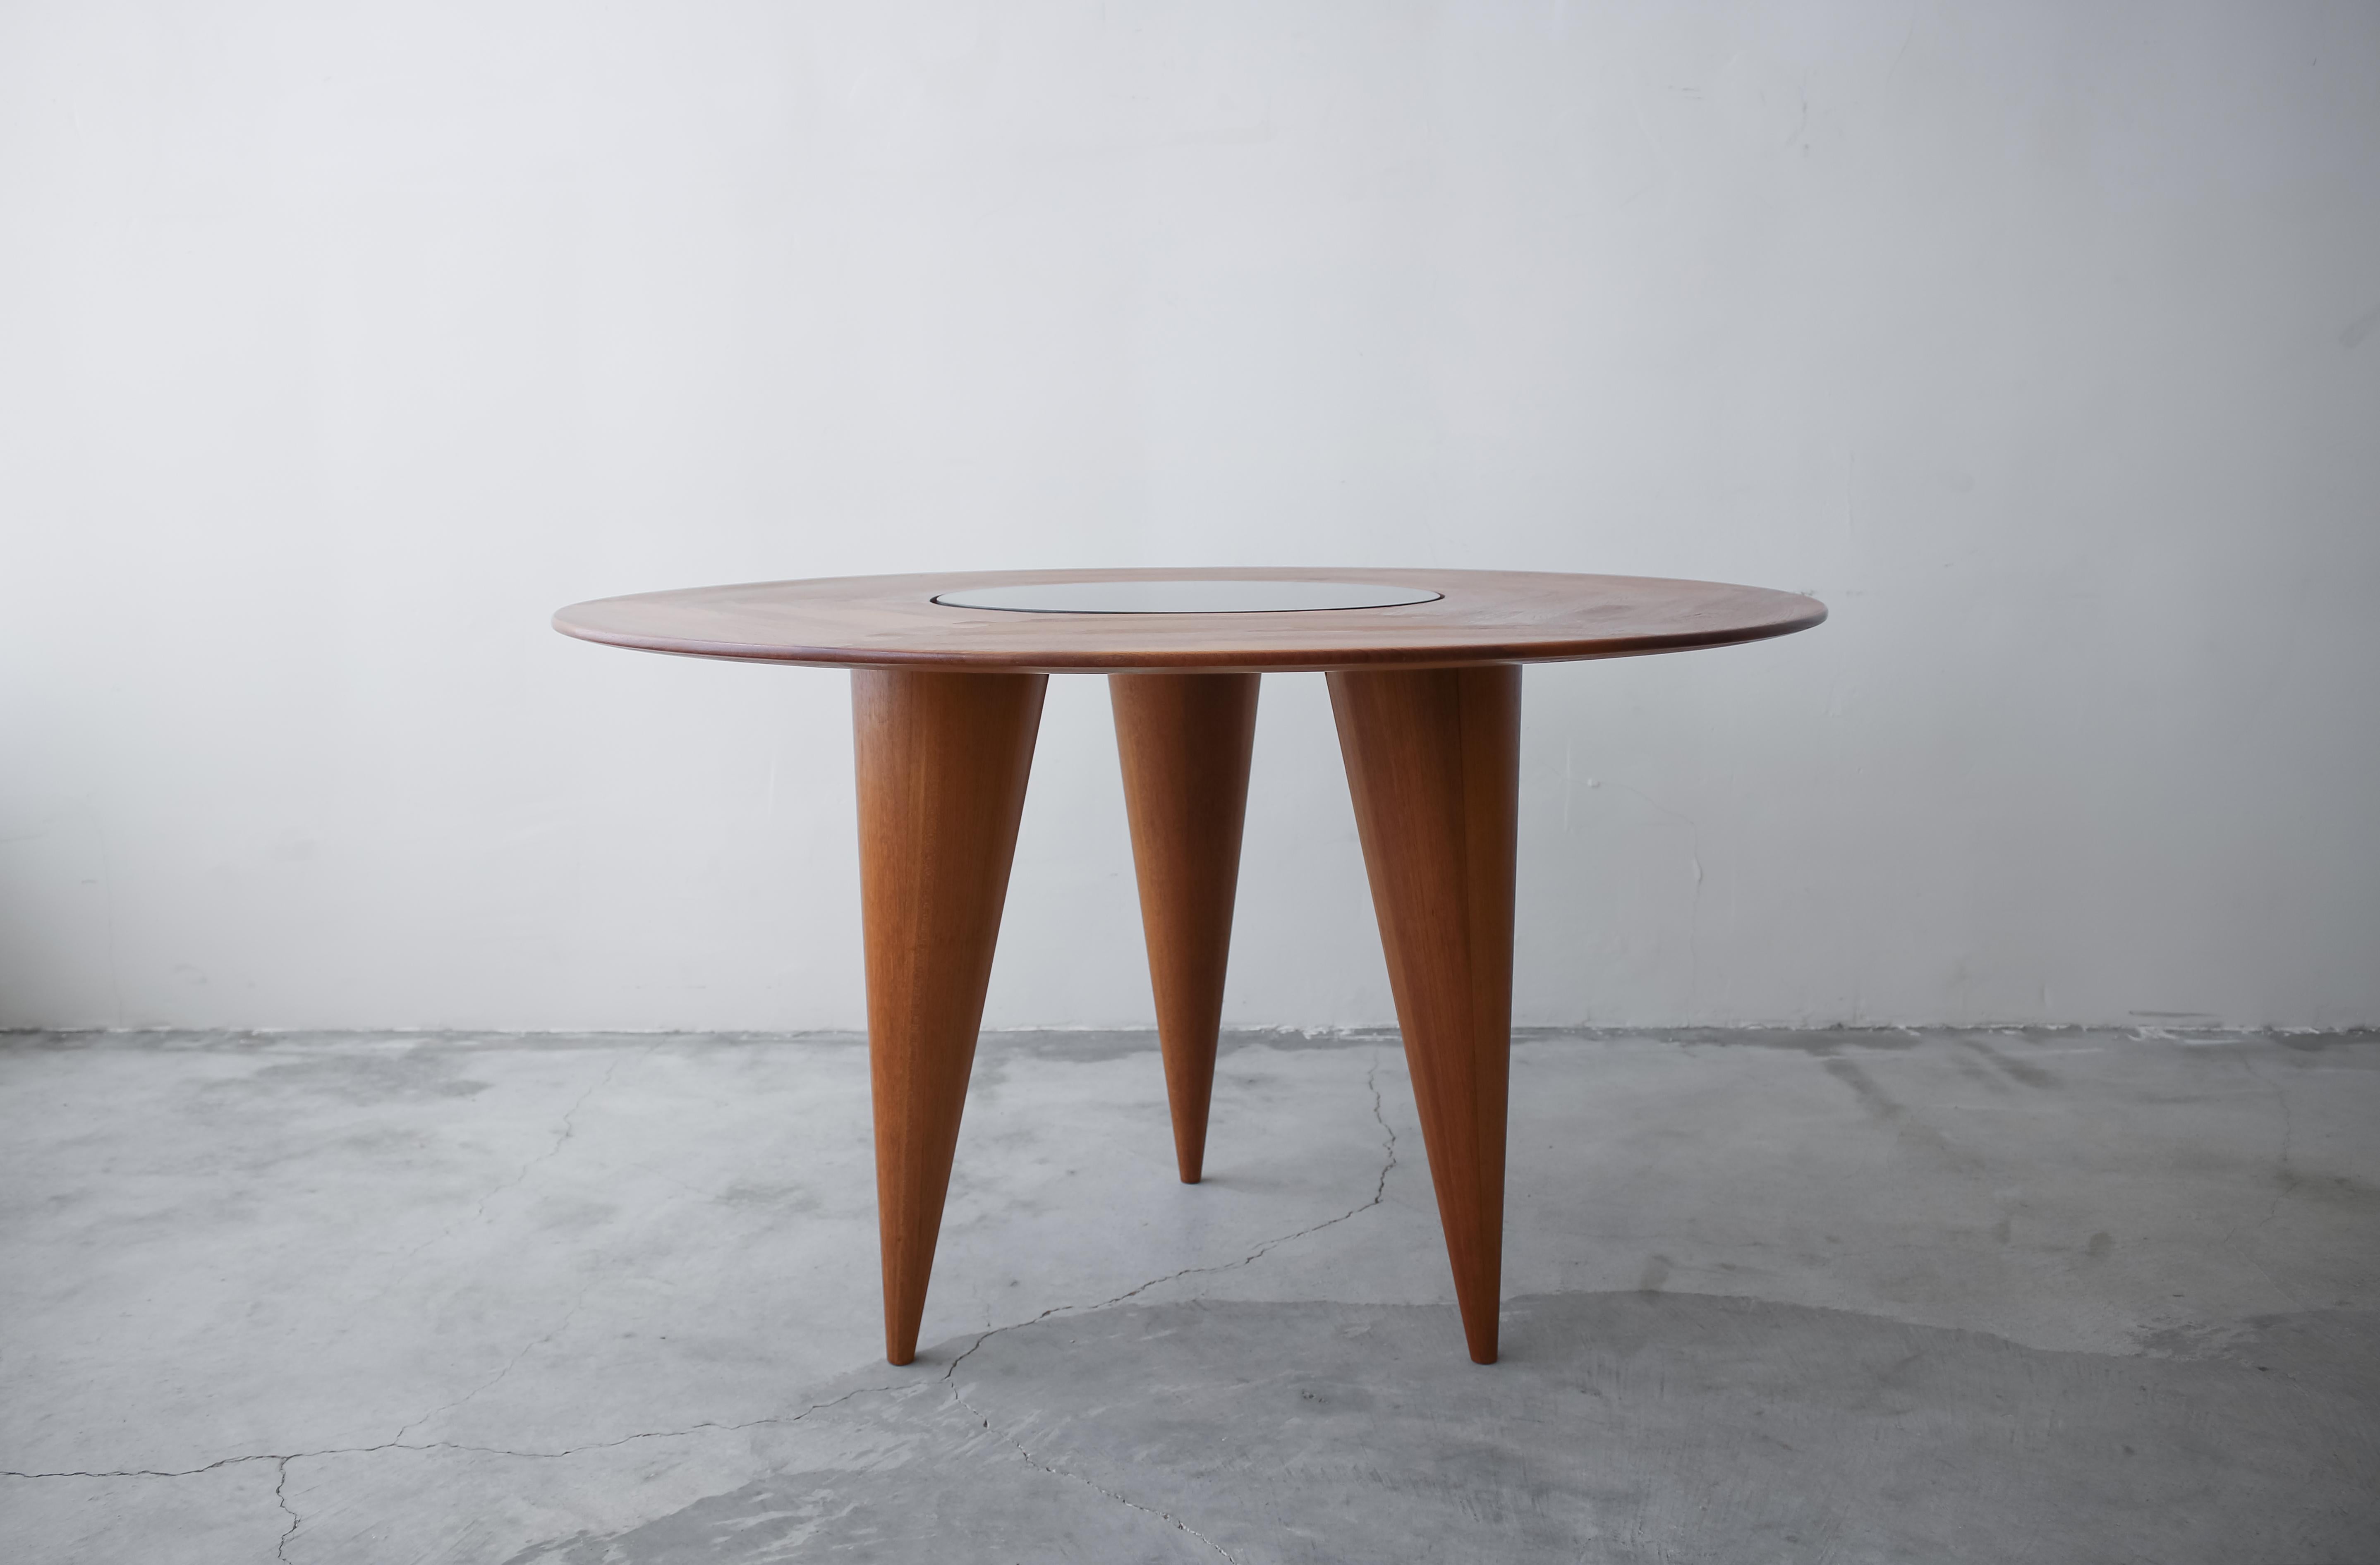 Looking for a unique small space dining table with lots of character, or better yet a gorgeous center table? This 3 legged solid teak table is absolutely stunning. Table is constructed using puzzle joints joining the solid wood pieces of the top and